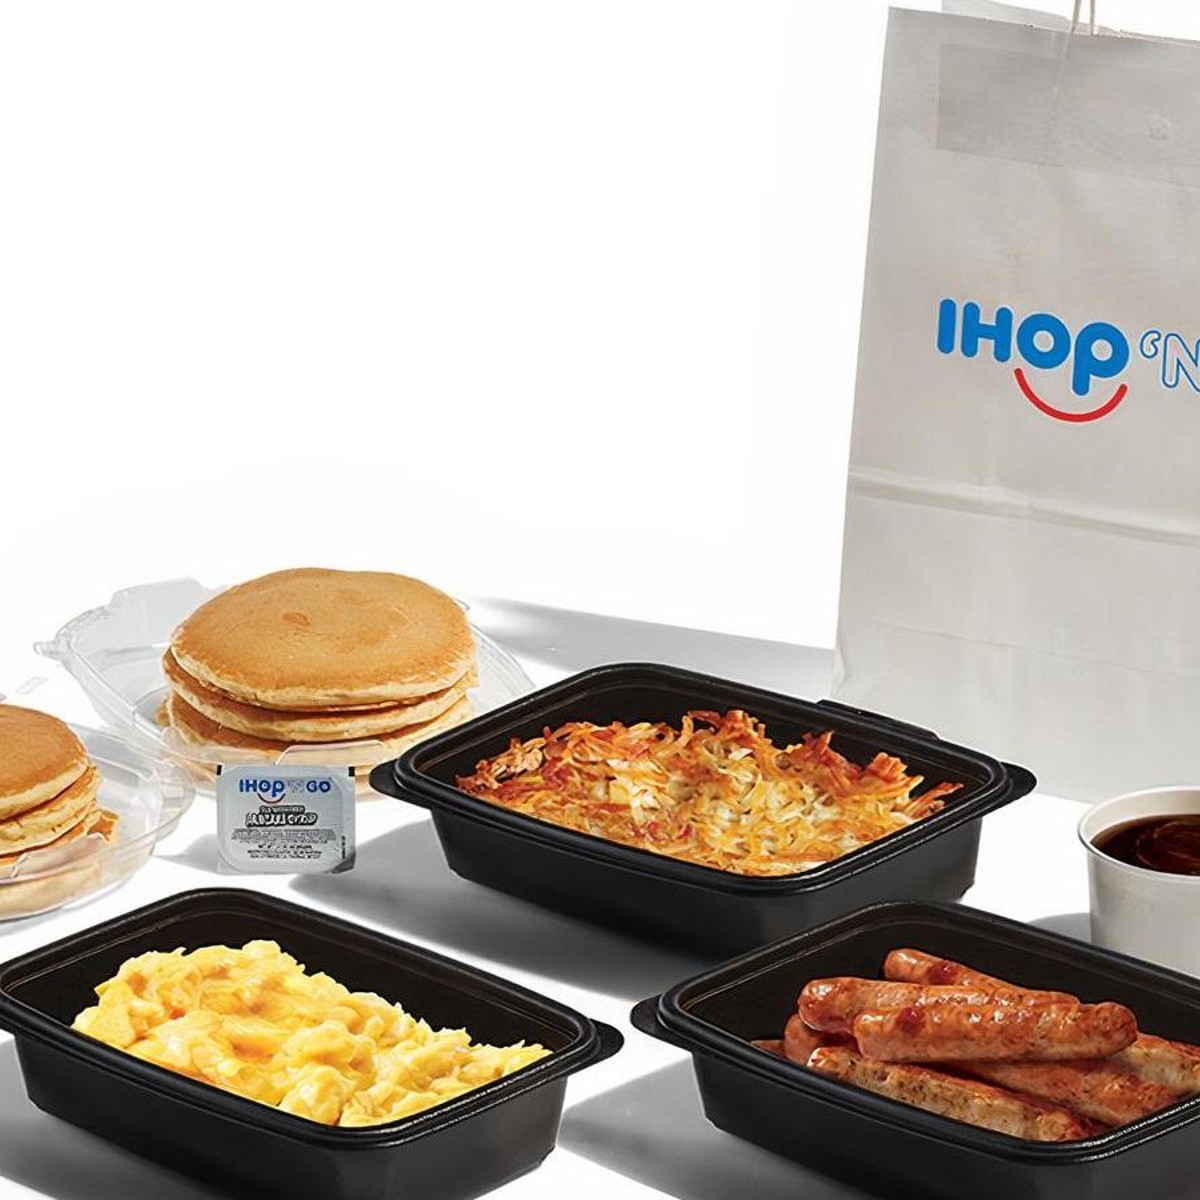 IHOP Catering Menu Prices of 2023 - Its Yummi